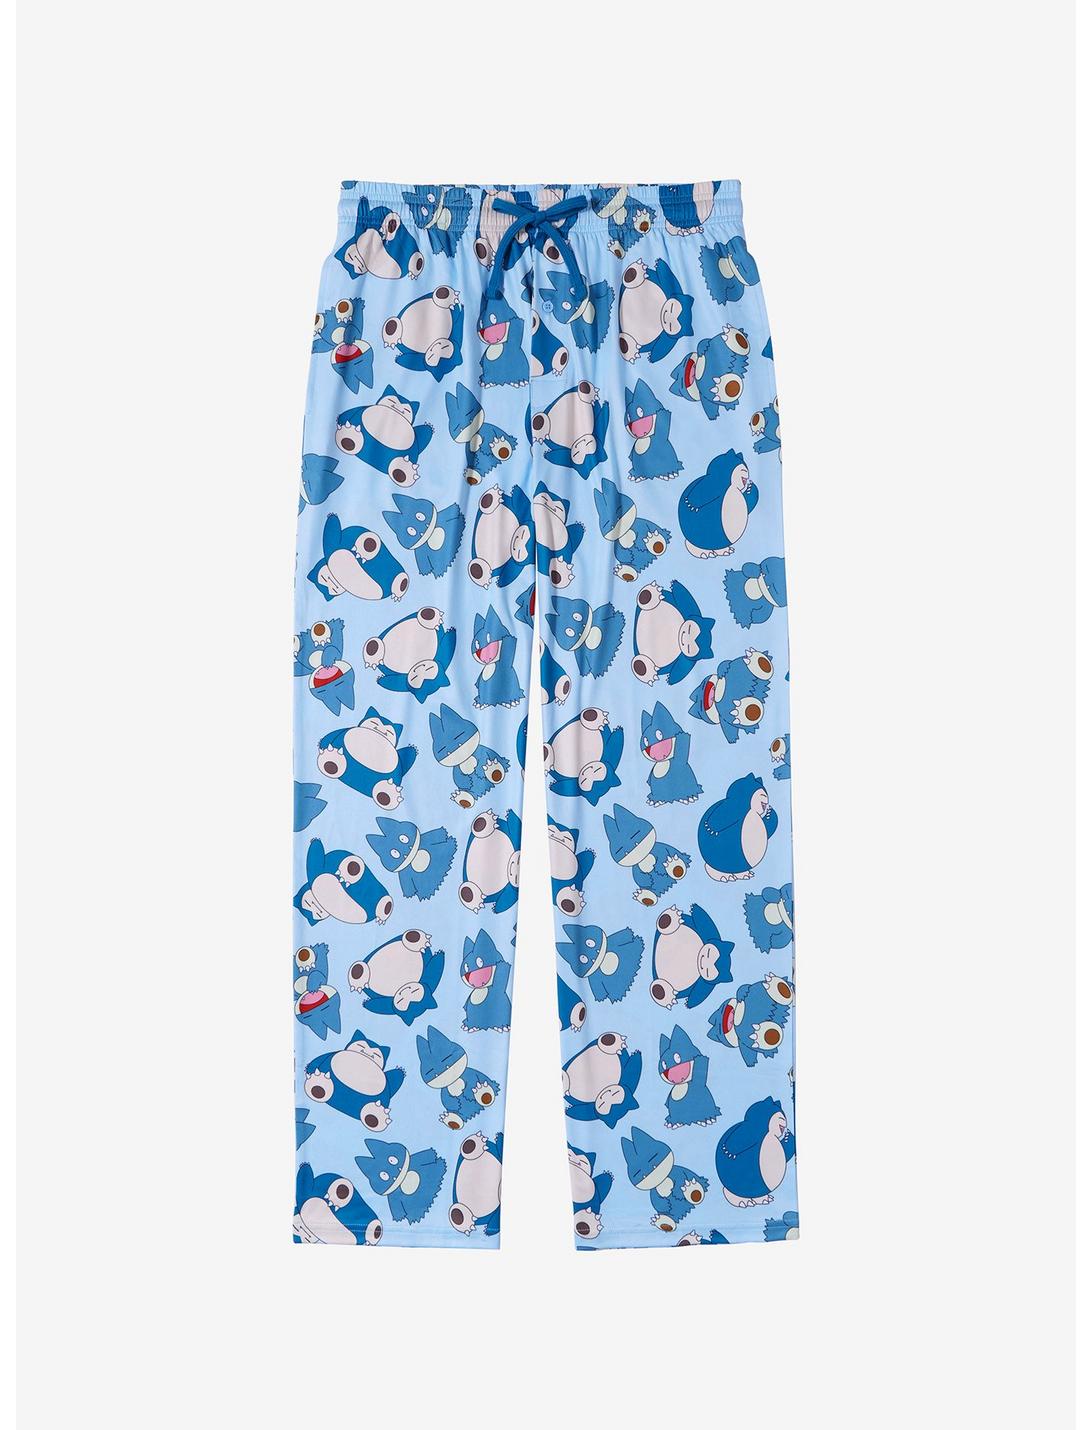 Pokémon Snorlax and Munchlax Allover Print Sleep Pants — BoxLunch Exclusive, LIGHT BLUE, hi-res